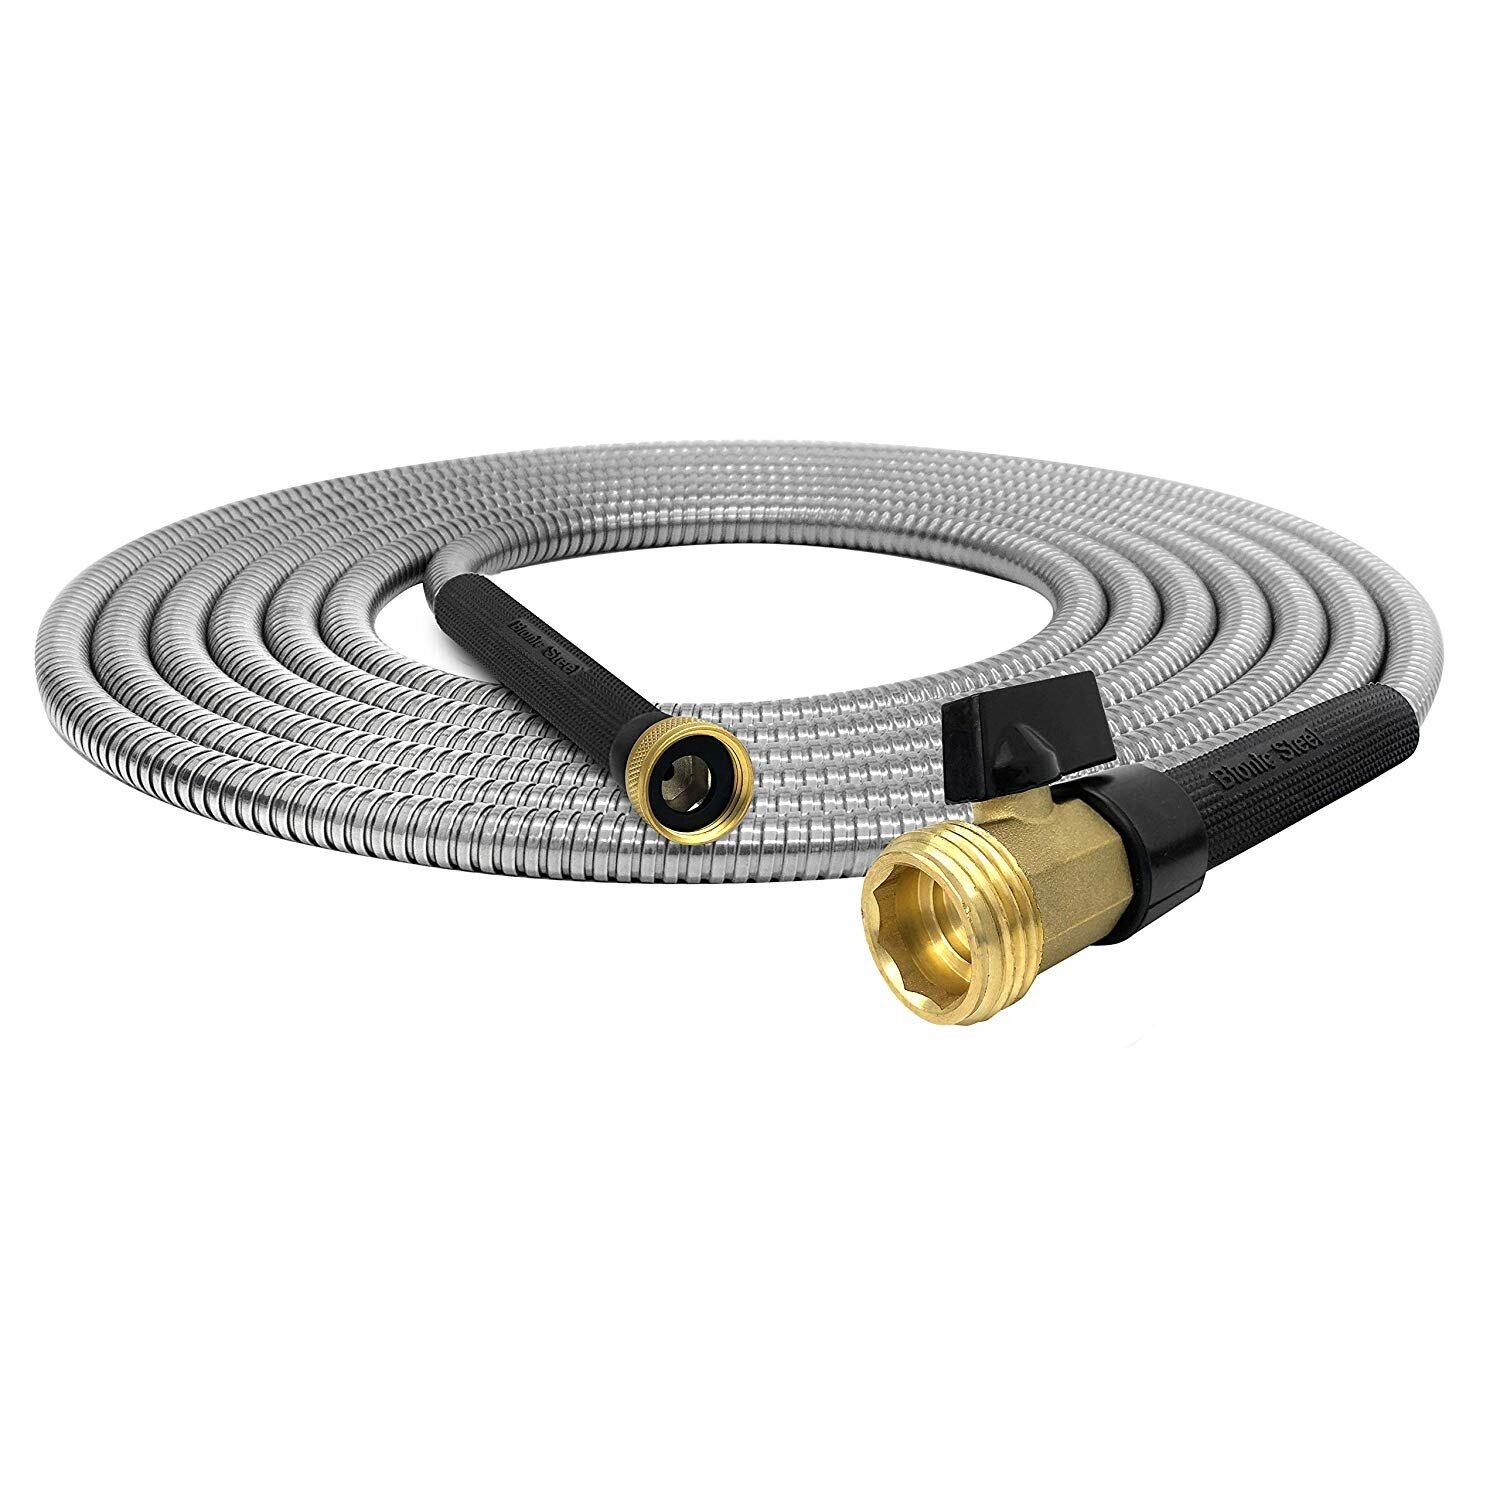 Metal Water Hose MTB 304 Stainless Steel Garden Hose 75-ft with Spray Nozzle and 3/4” Solid Aluminum Connectors